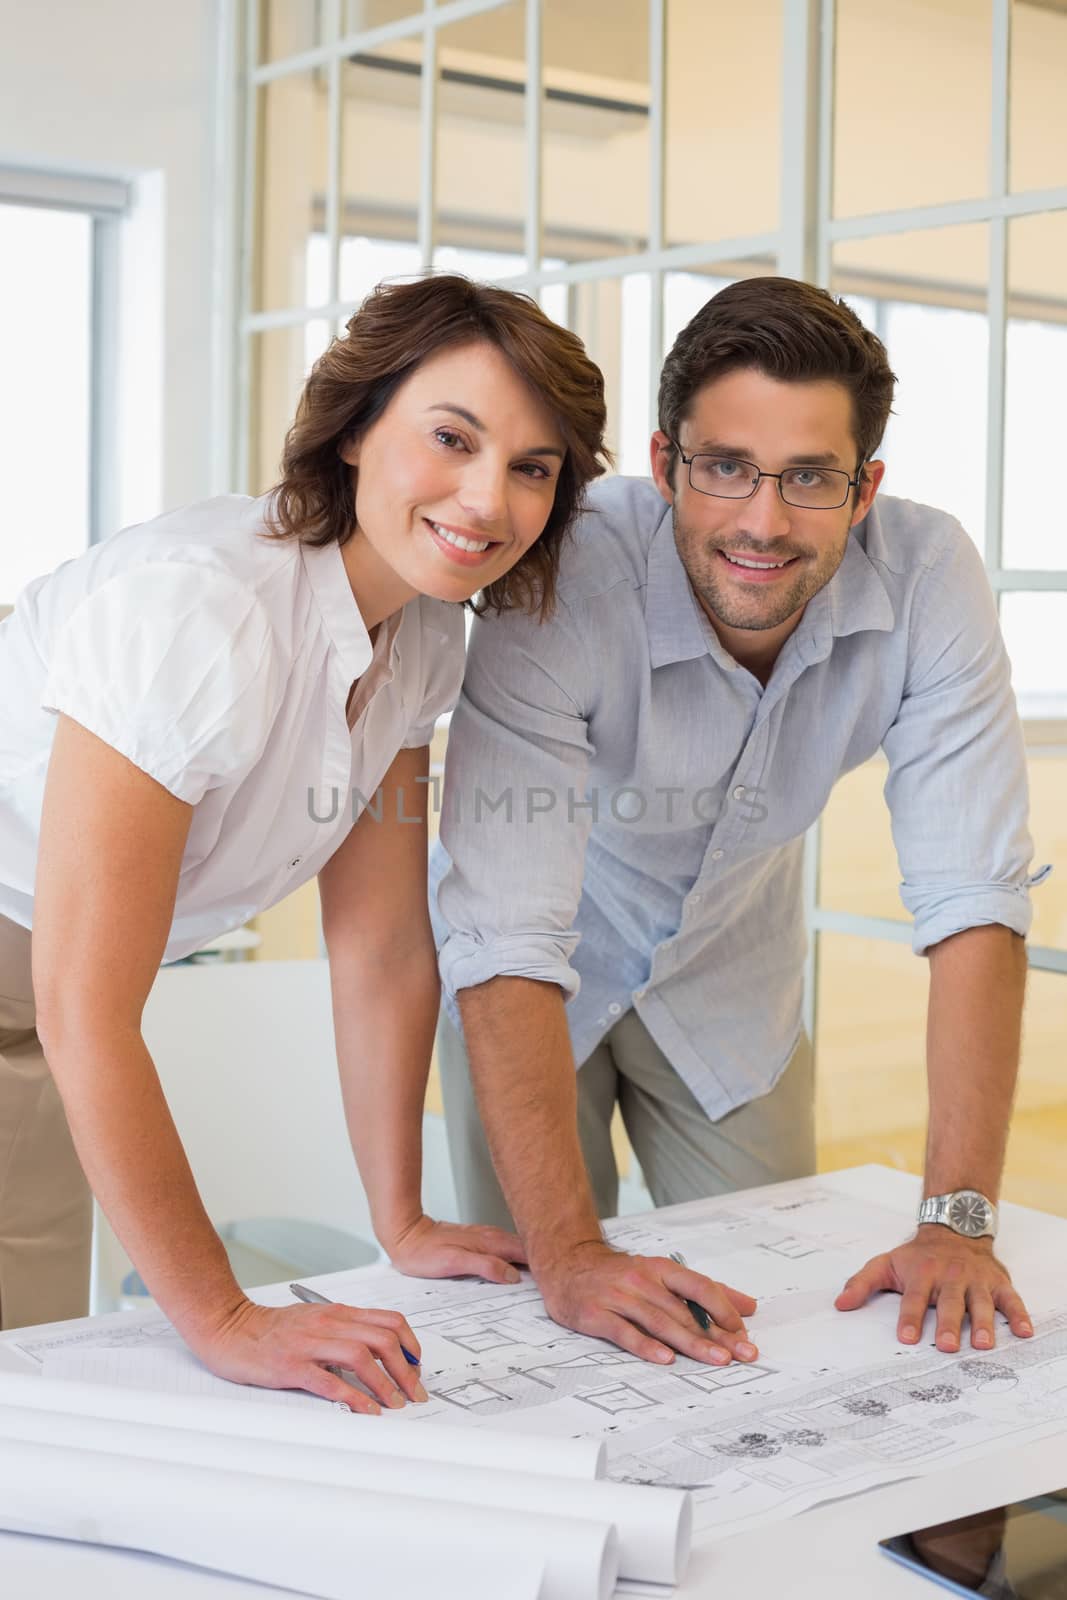 Portrait of two young business people working on blueprints at the office